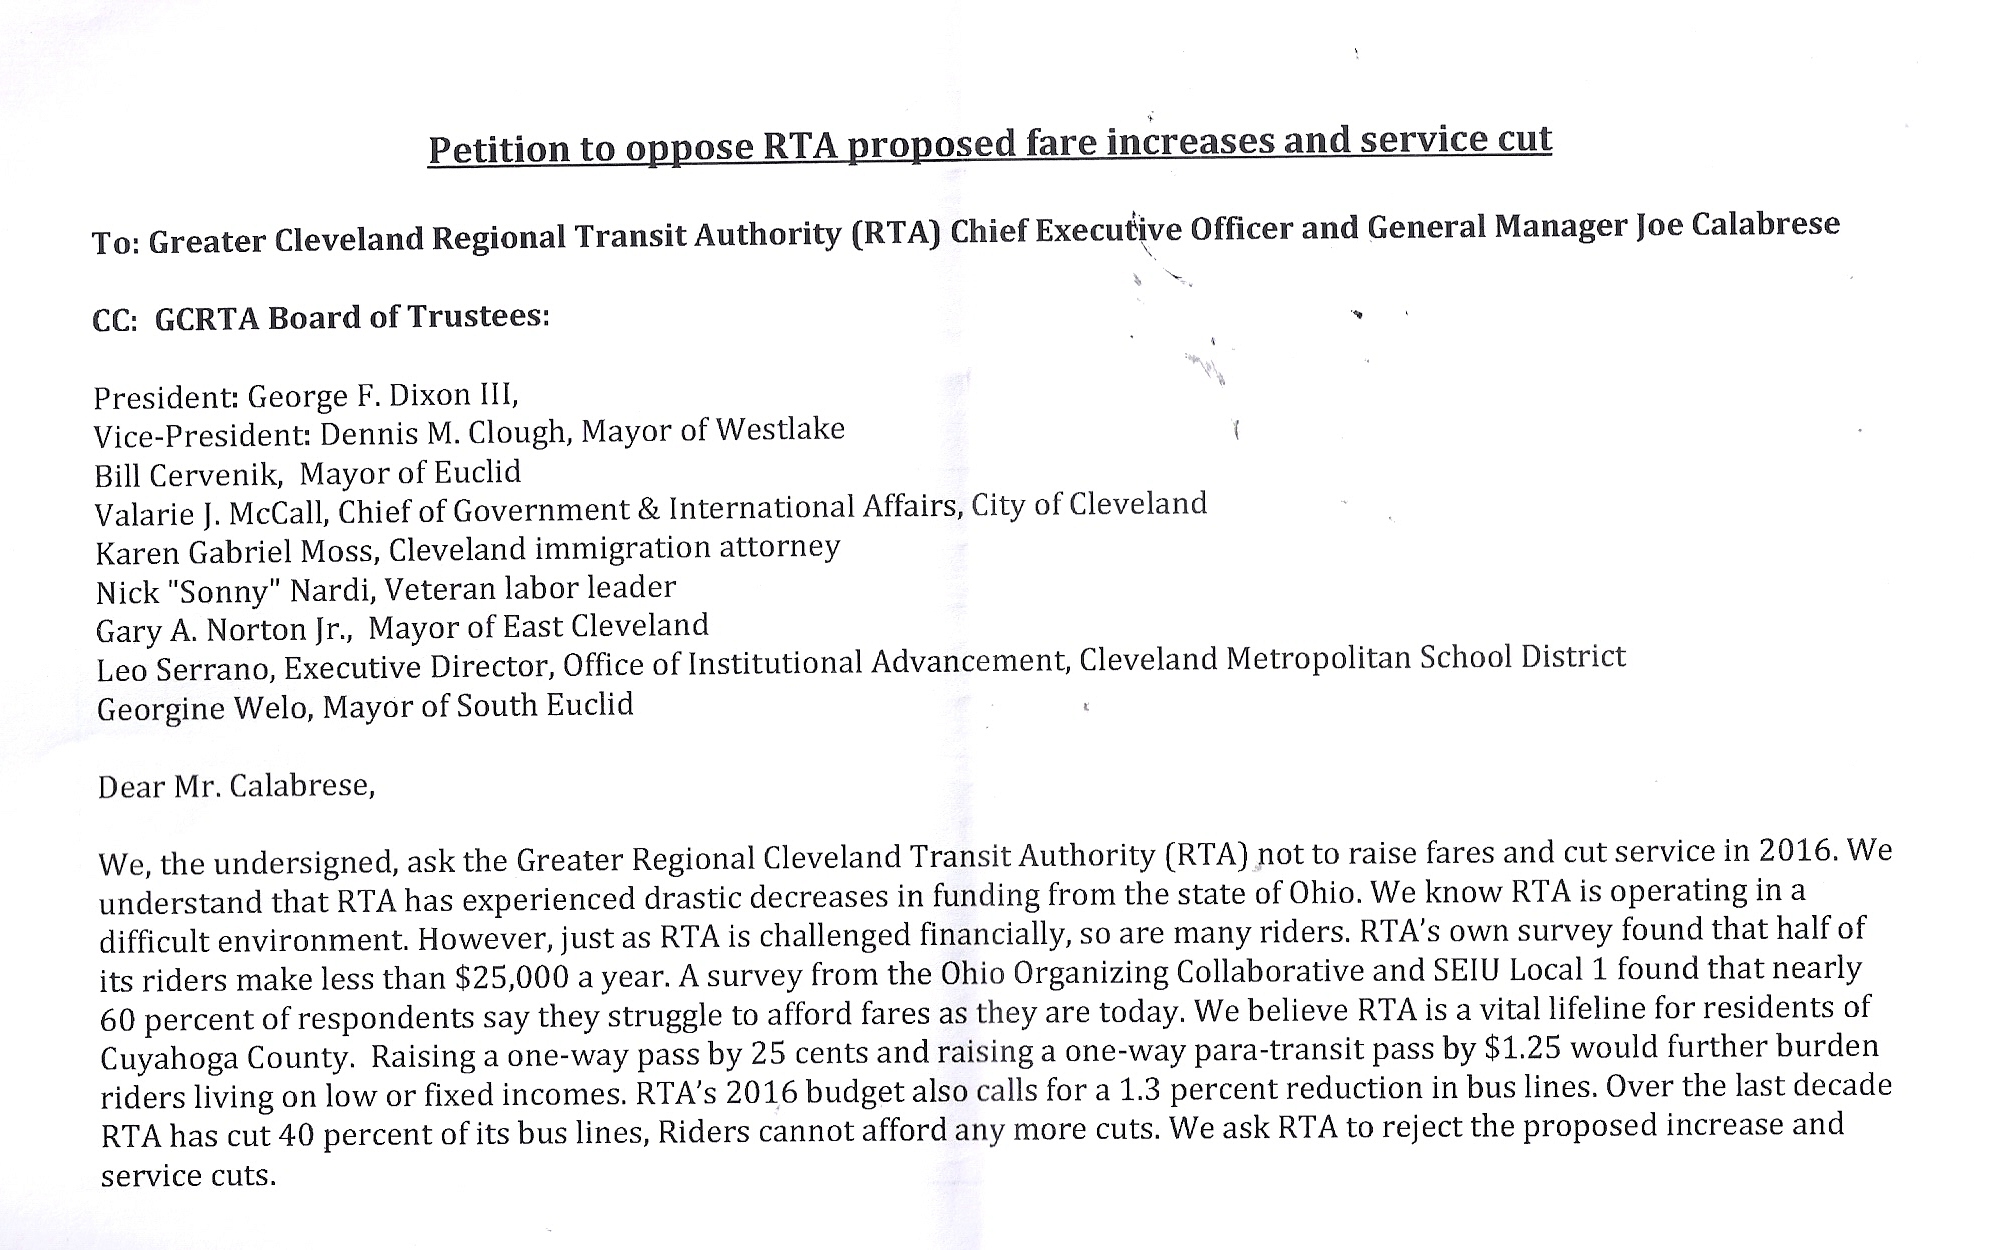 Petition Against RTA Rate Hike